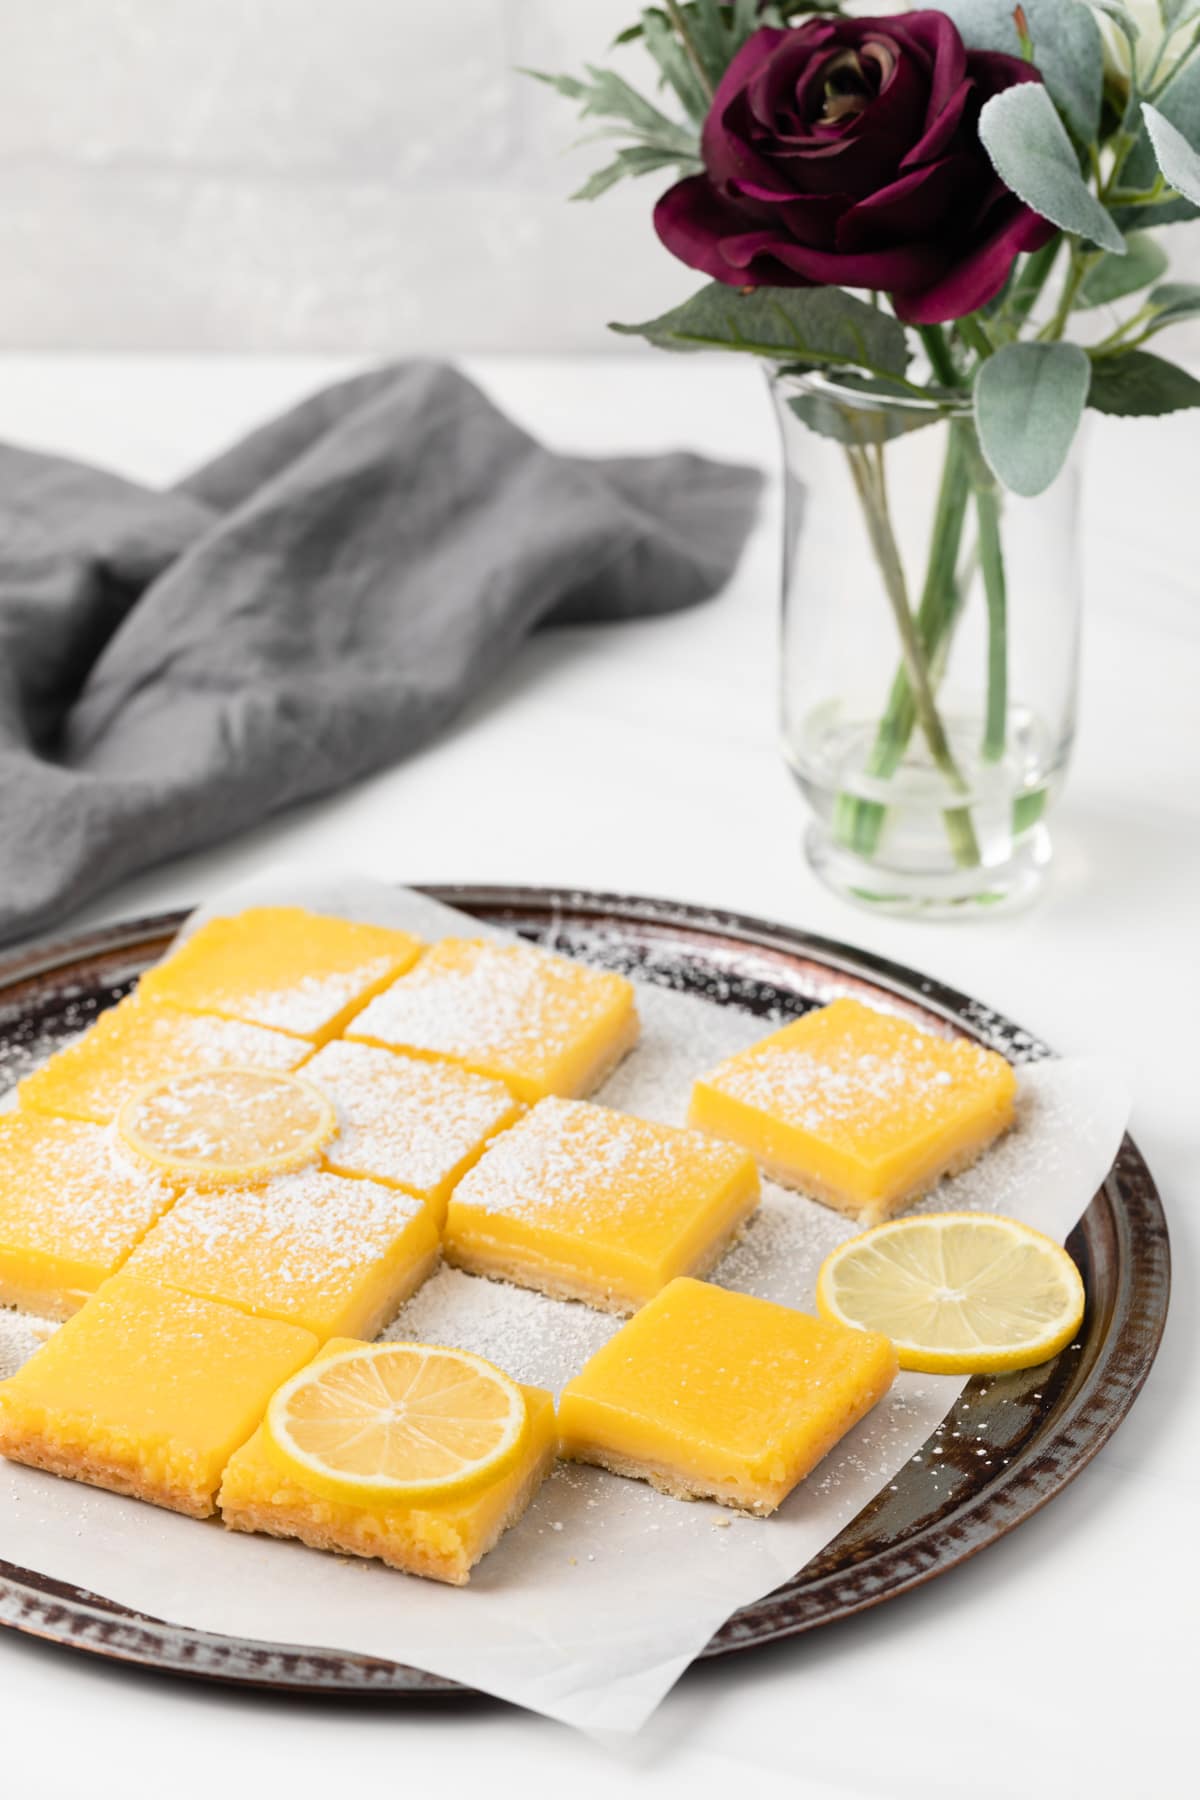 lemon bars arranged on round baking tray lined with parchment paper next to a vase of flowers and grey cloth